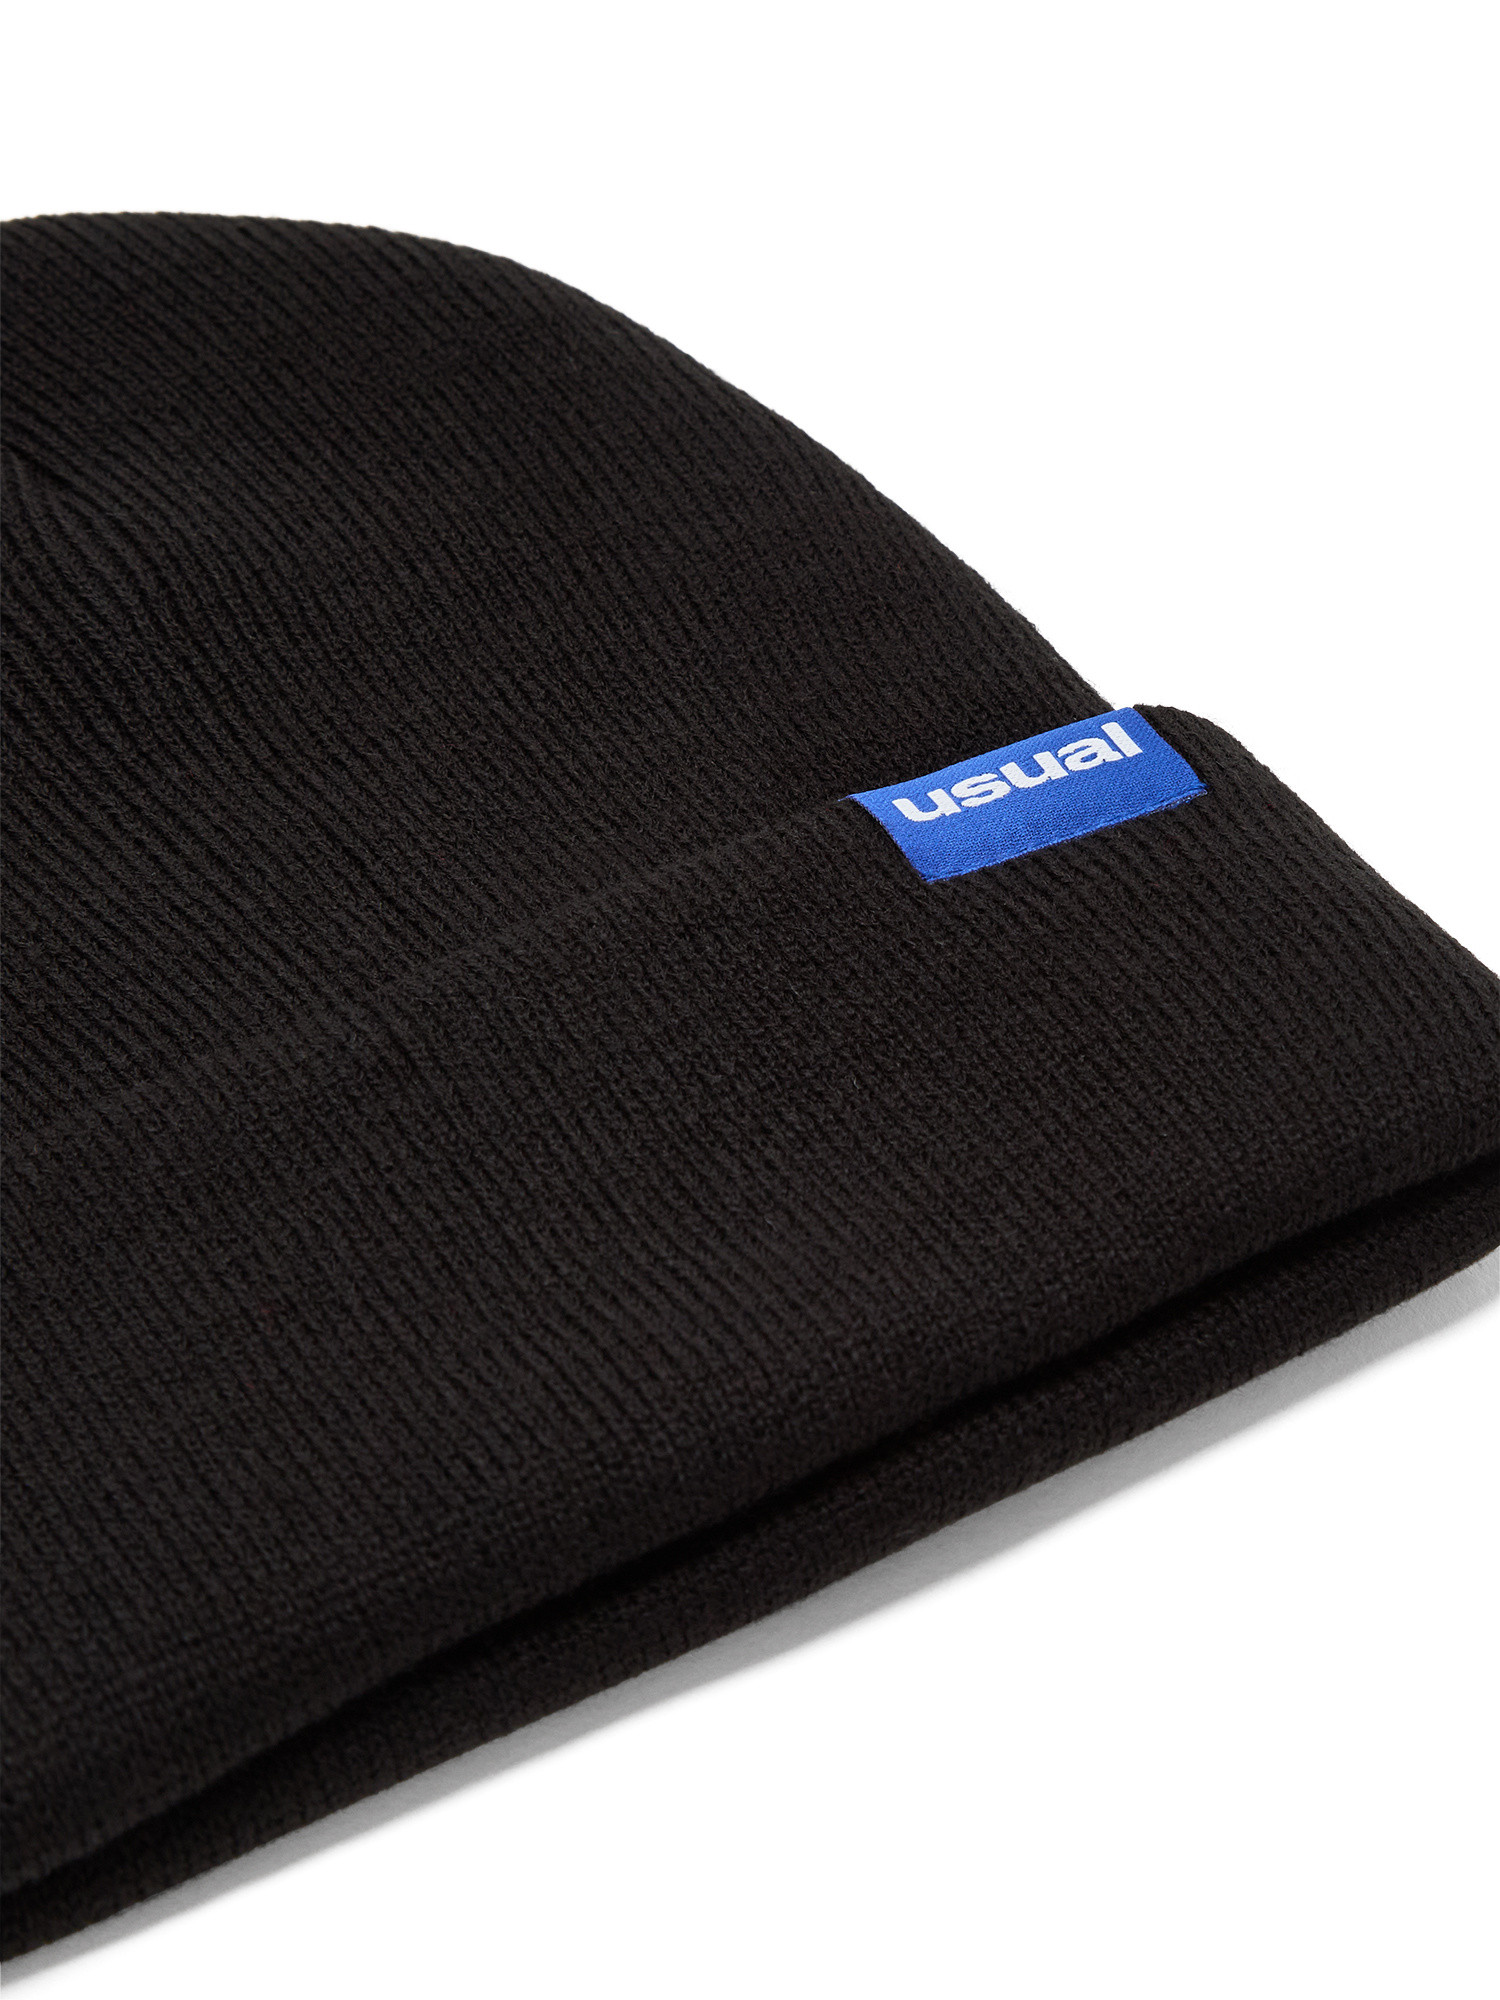 Usual - Cappellino Beanie Flag, Nero, large image number 1